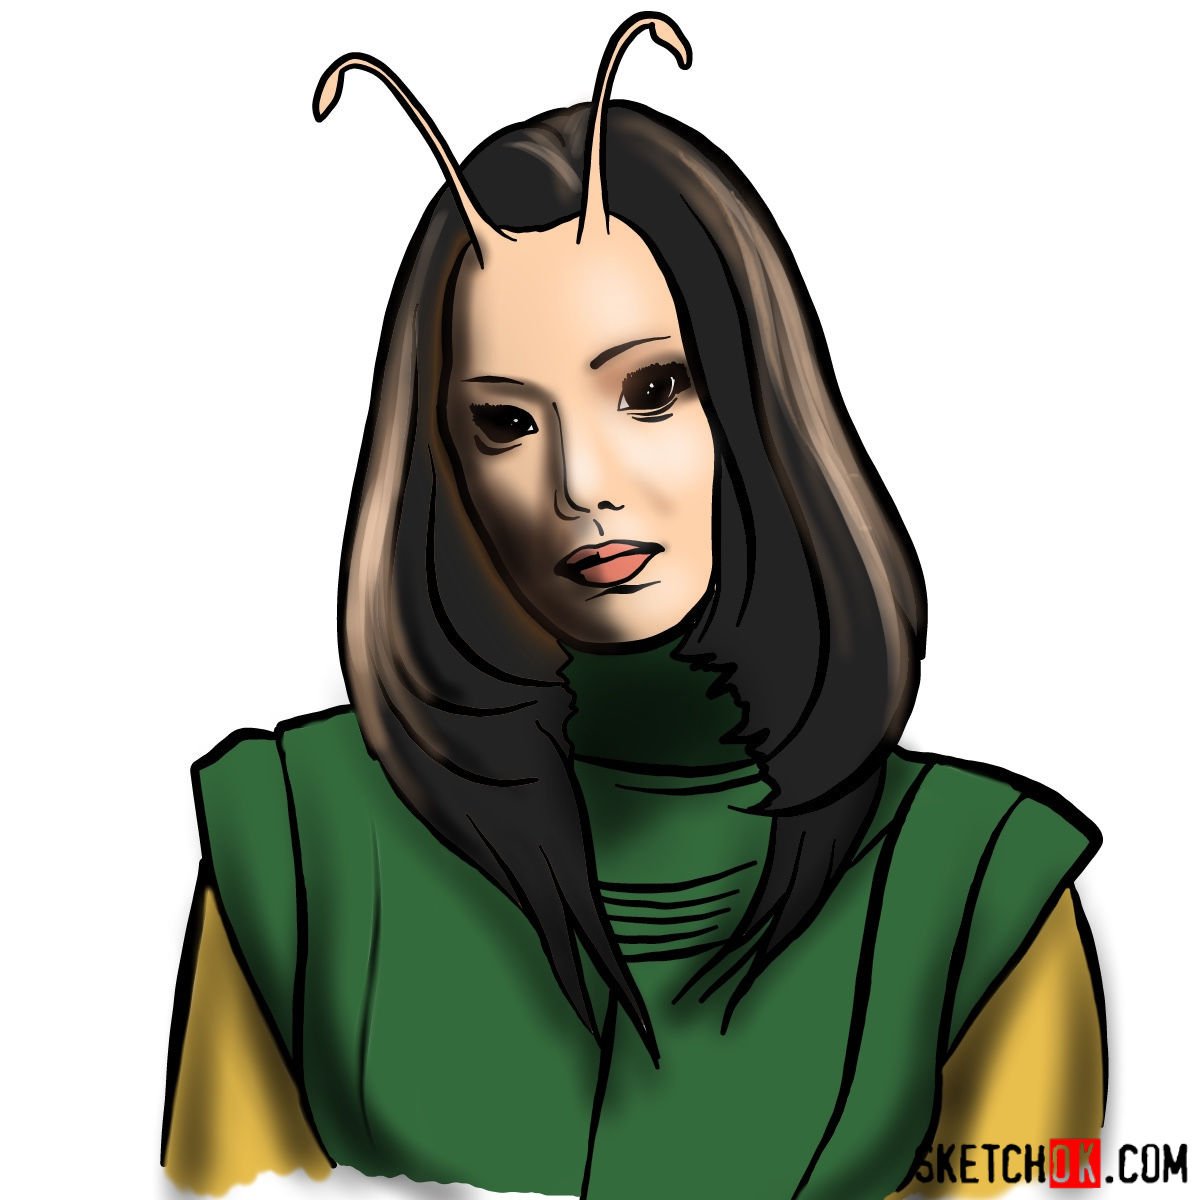 How to draw Mantis from Guardians of the Galaxy